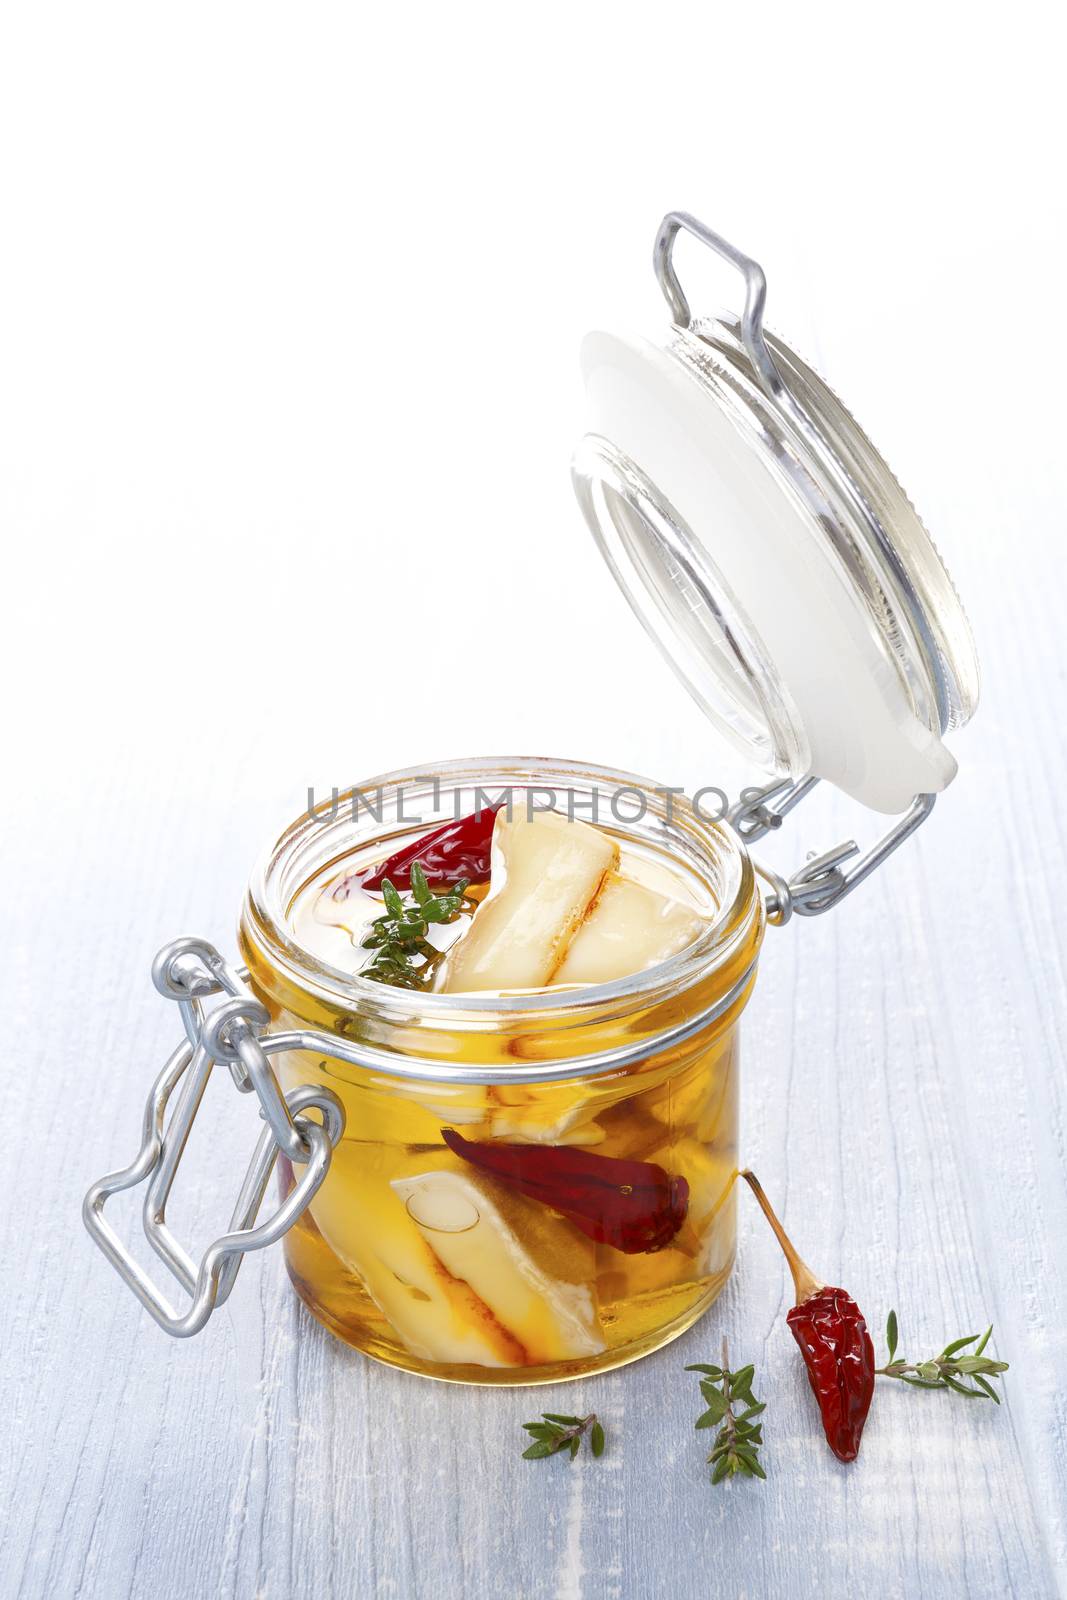 Marinated cheese in glass jar on blue wooden background. Culinary marinated cheese, rustic styles.